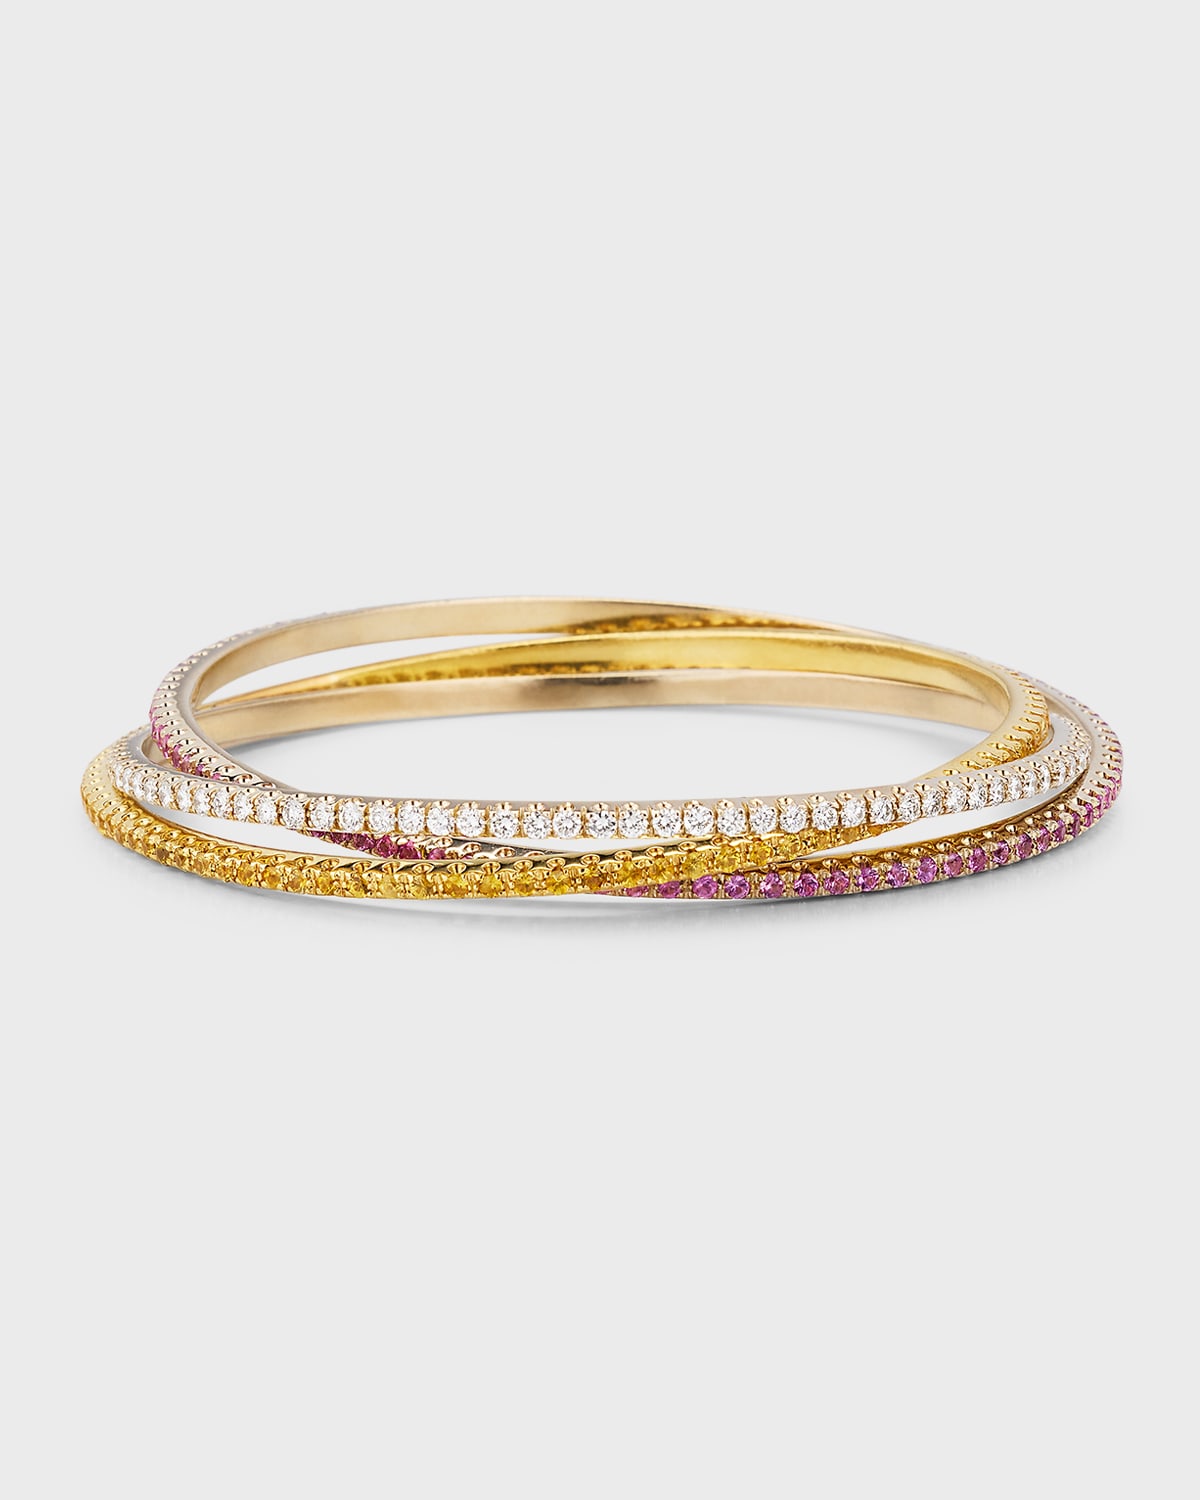 Nm Estate Estate 18k White And Yellow Gold Diamond, Yellow Sapphire And Pink Sapphire Bangles, Set Of 3